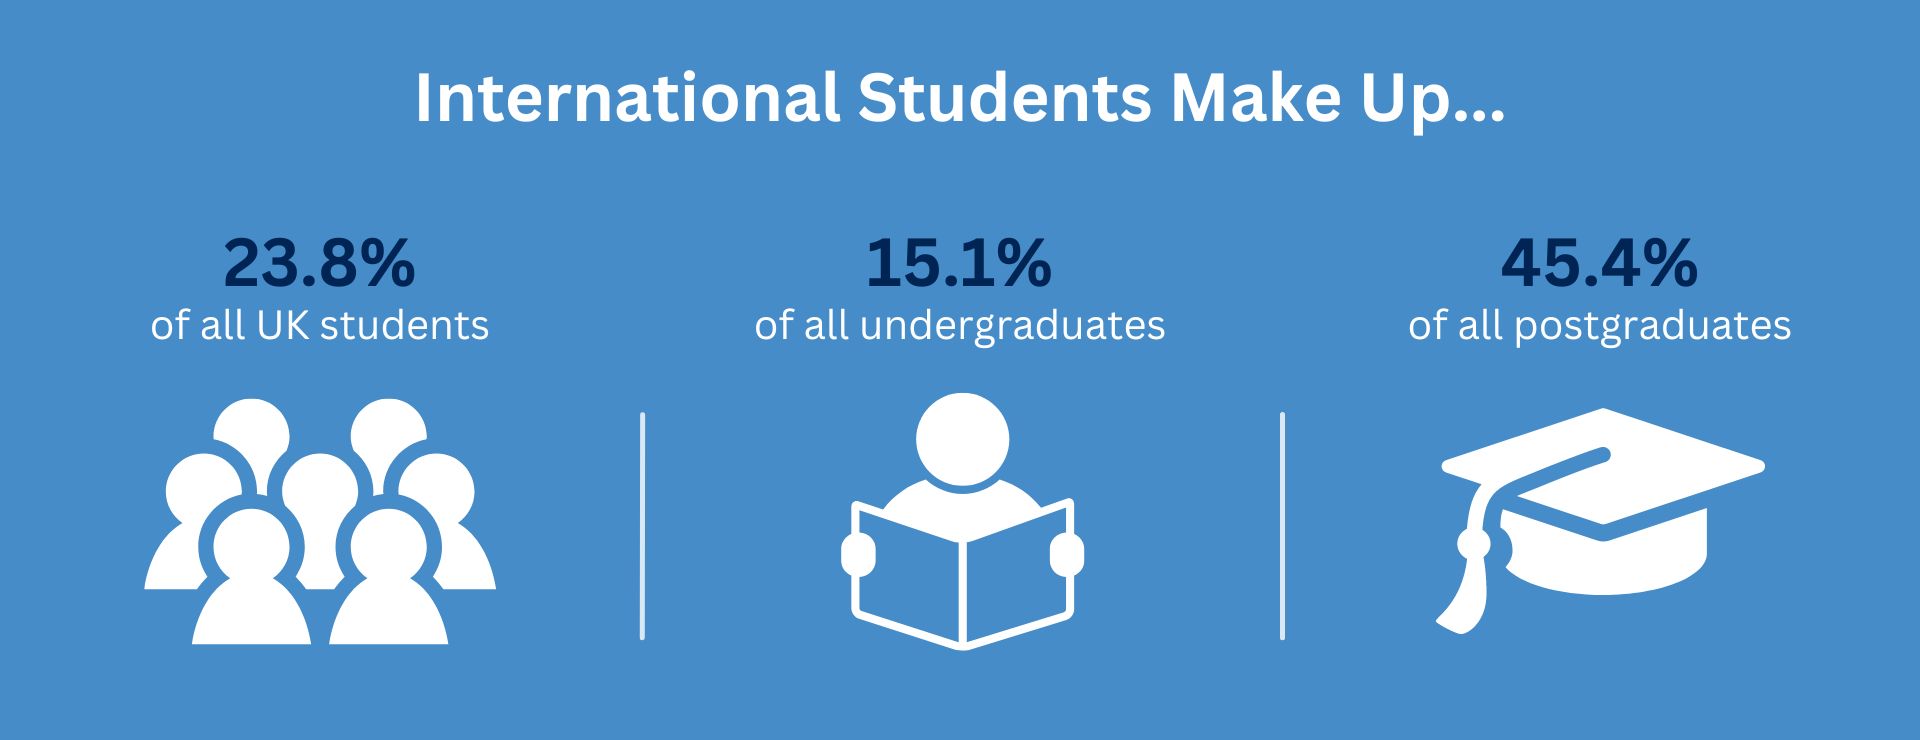 international students in the UK data